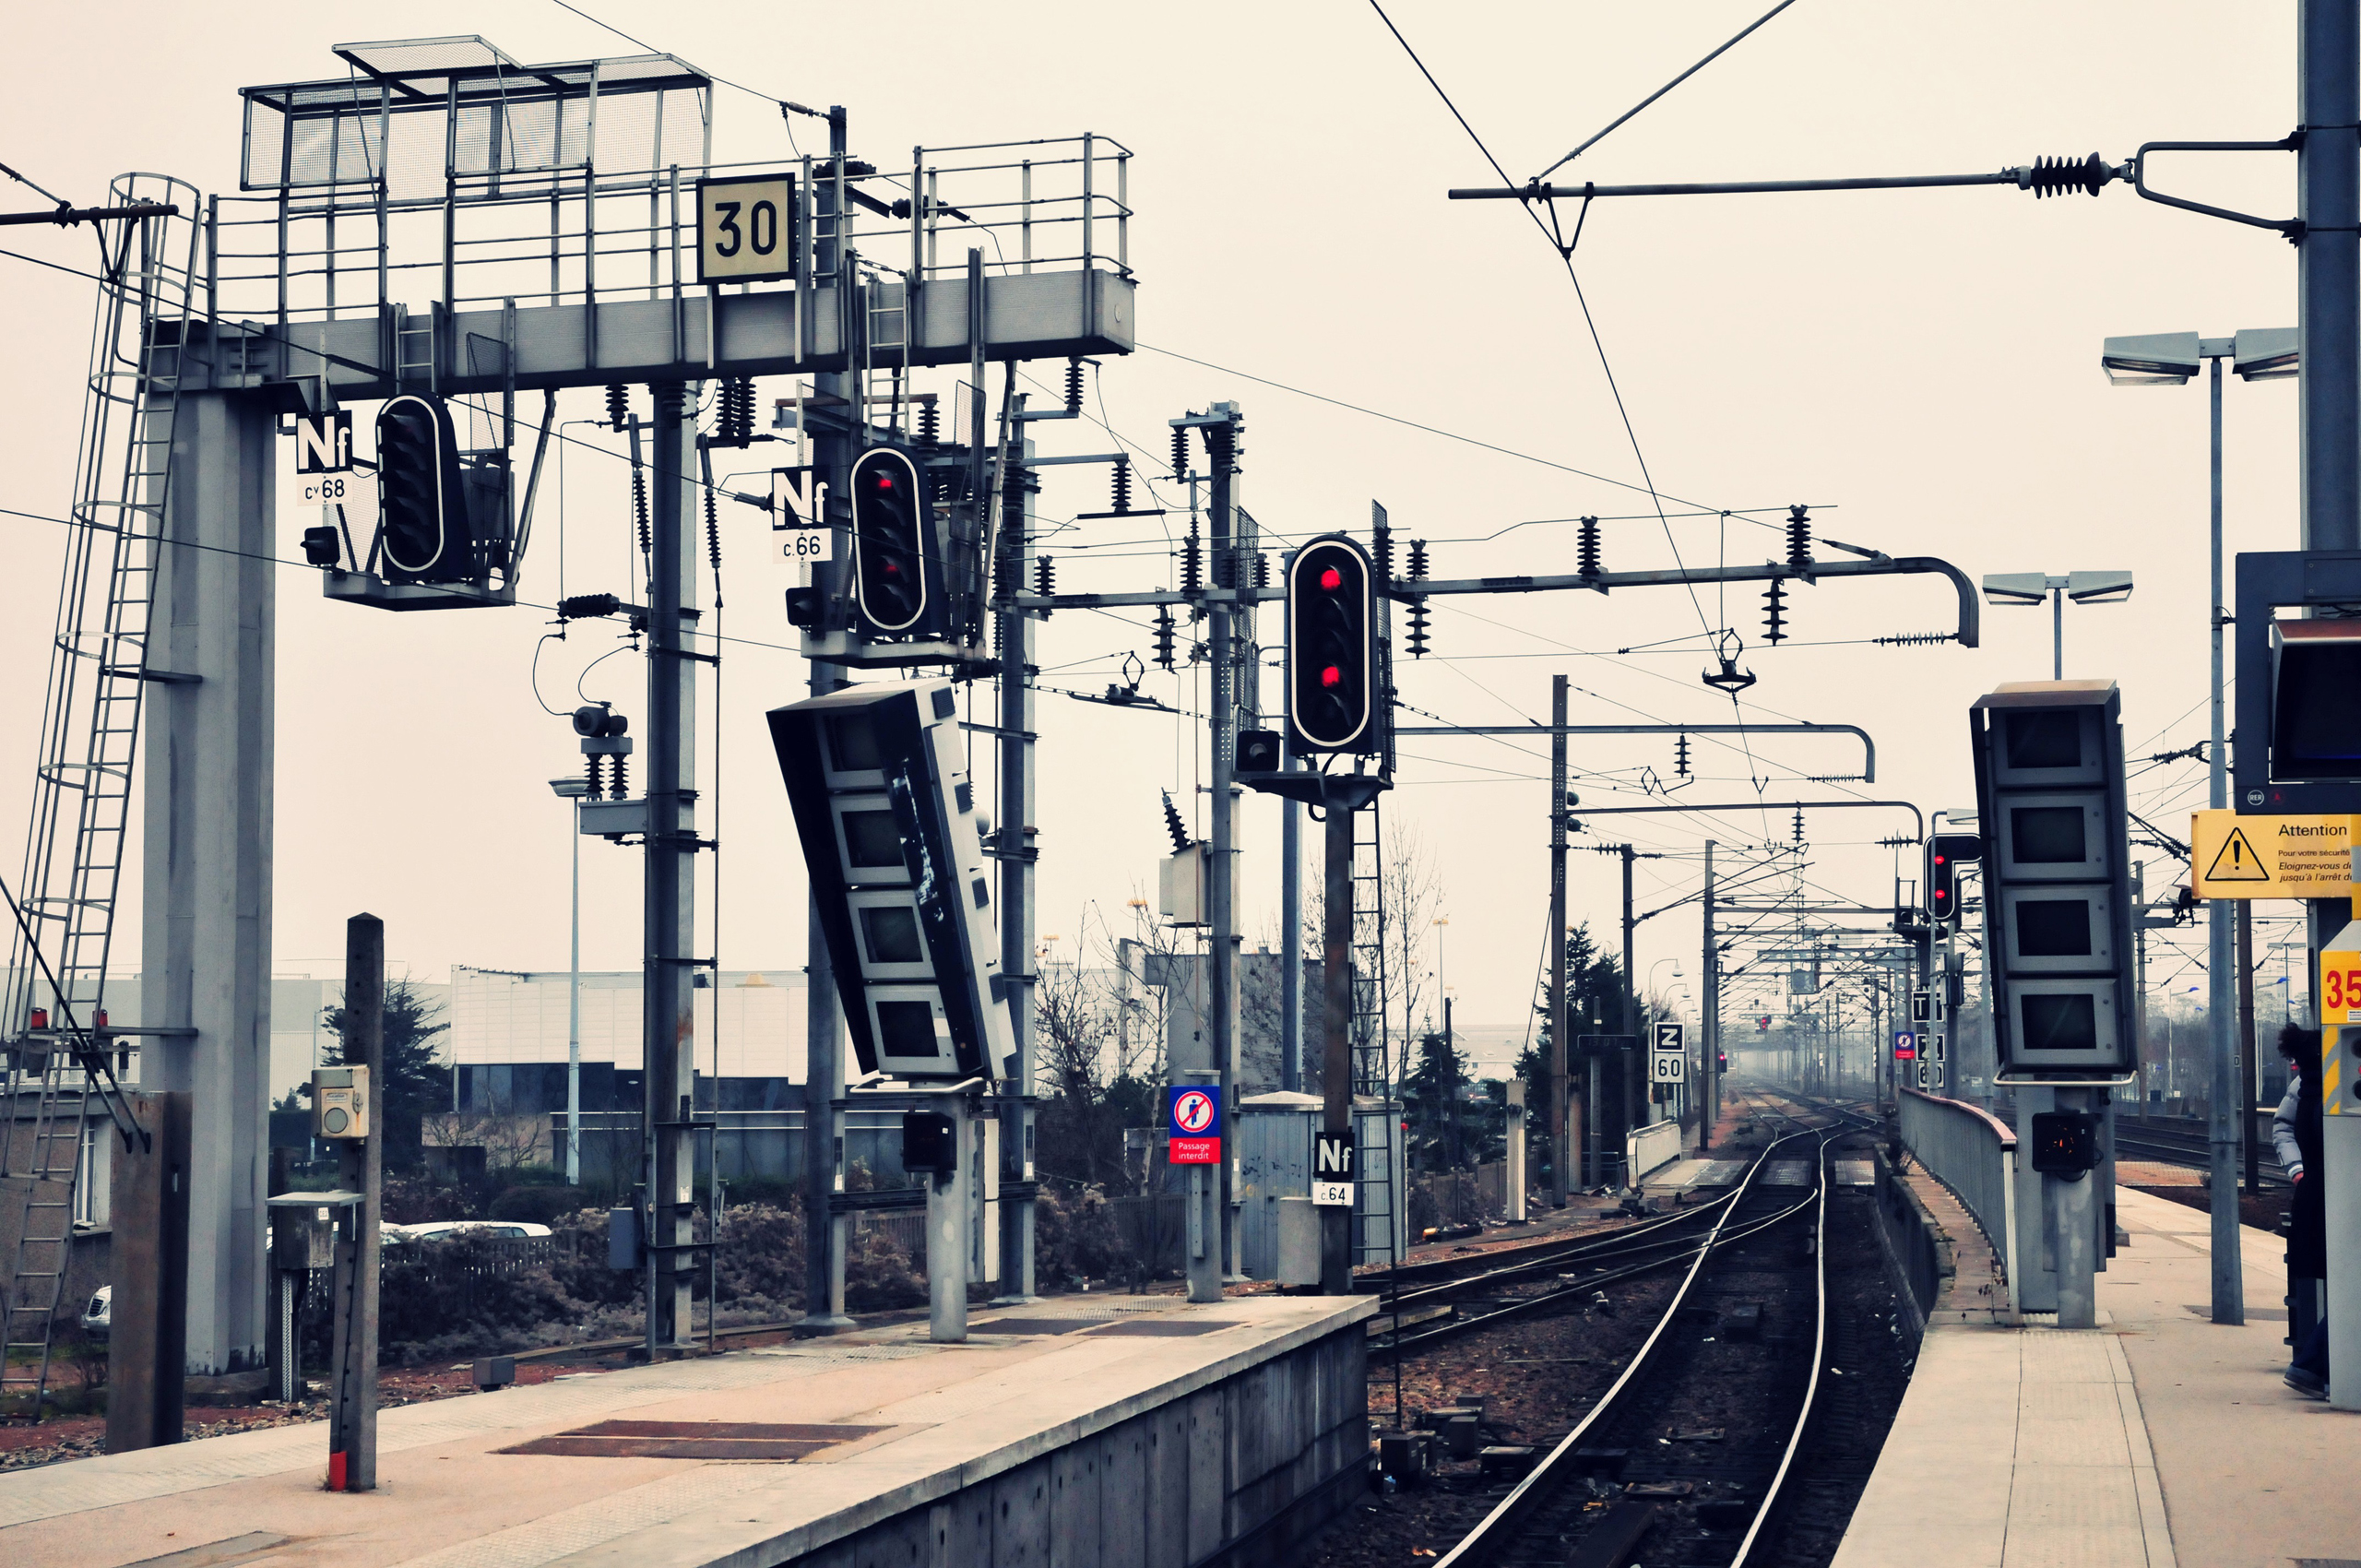 Railroad traffic lights / 2560 x 1700 / Other / Photography ...